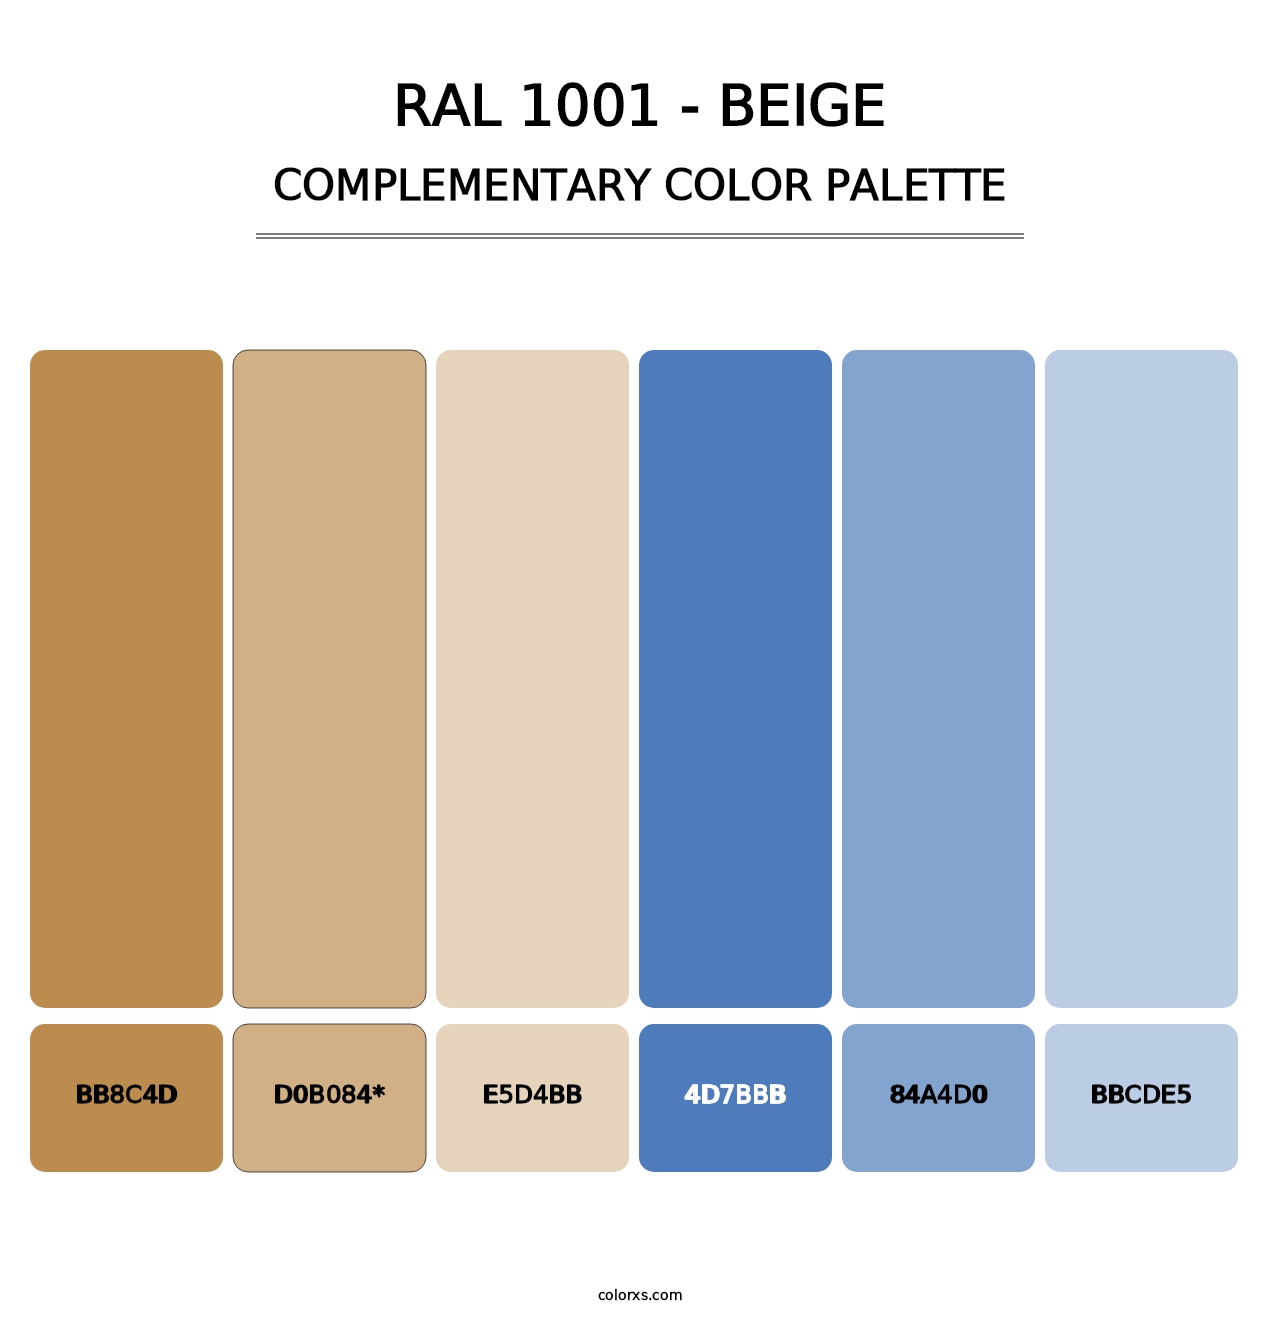 RAL 1001 - Beige - Complementary Color Palette